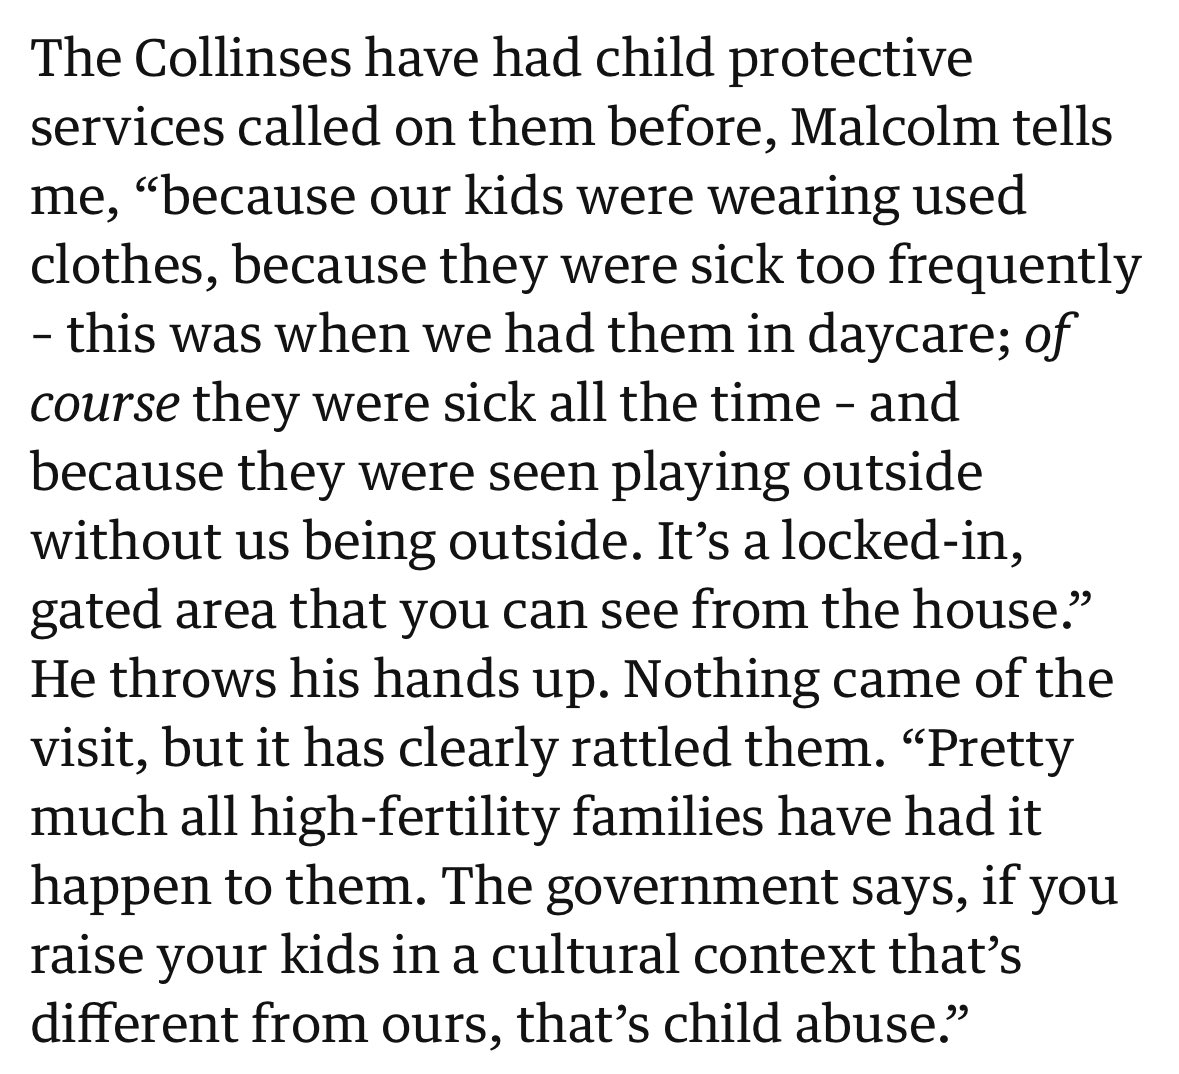 I don’t think Malcom is being completely truthful here. CPS isn’t called because a kid wearing used clothes-maybe clothes that are inappropriate for the weather? Maybe they called CPS because your kids kept coming to daycare with actual fevers?
Link: 
amp.theguardian.com/lifeandstyle/a…